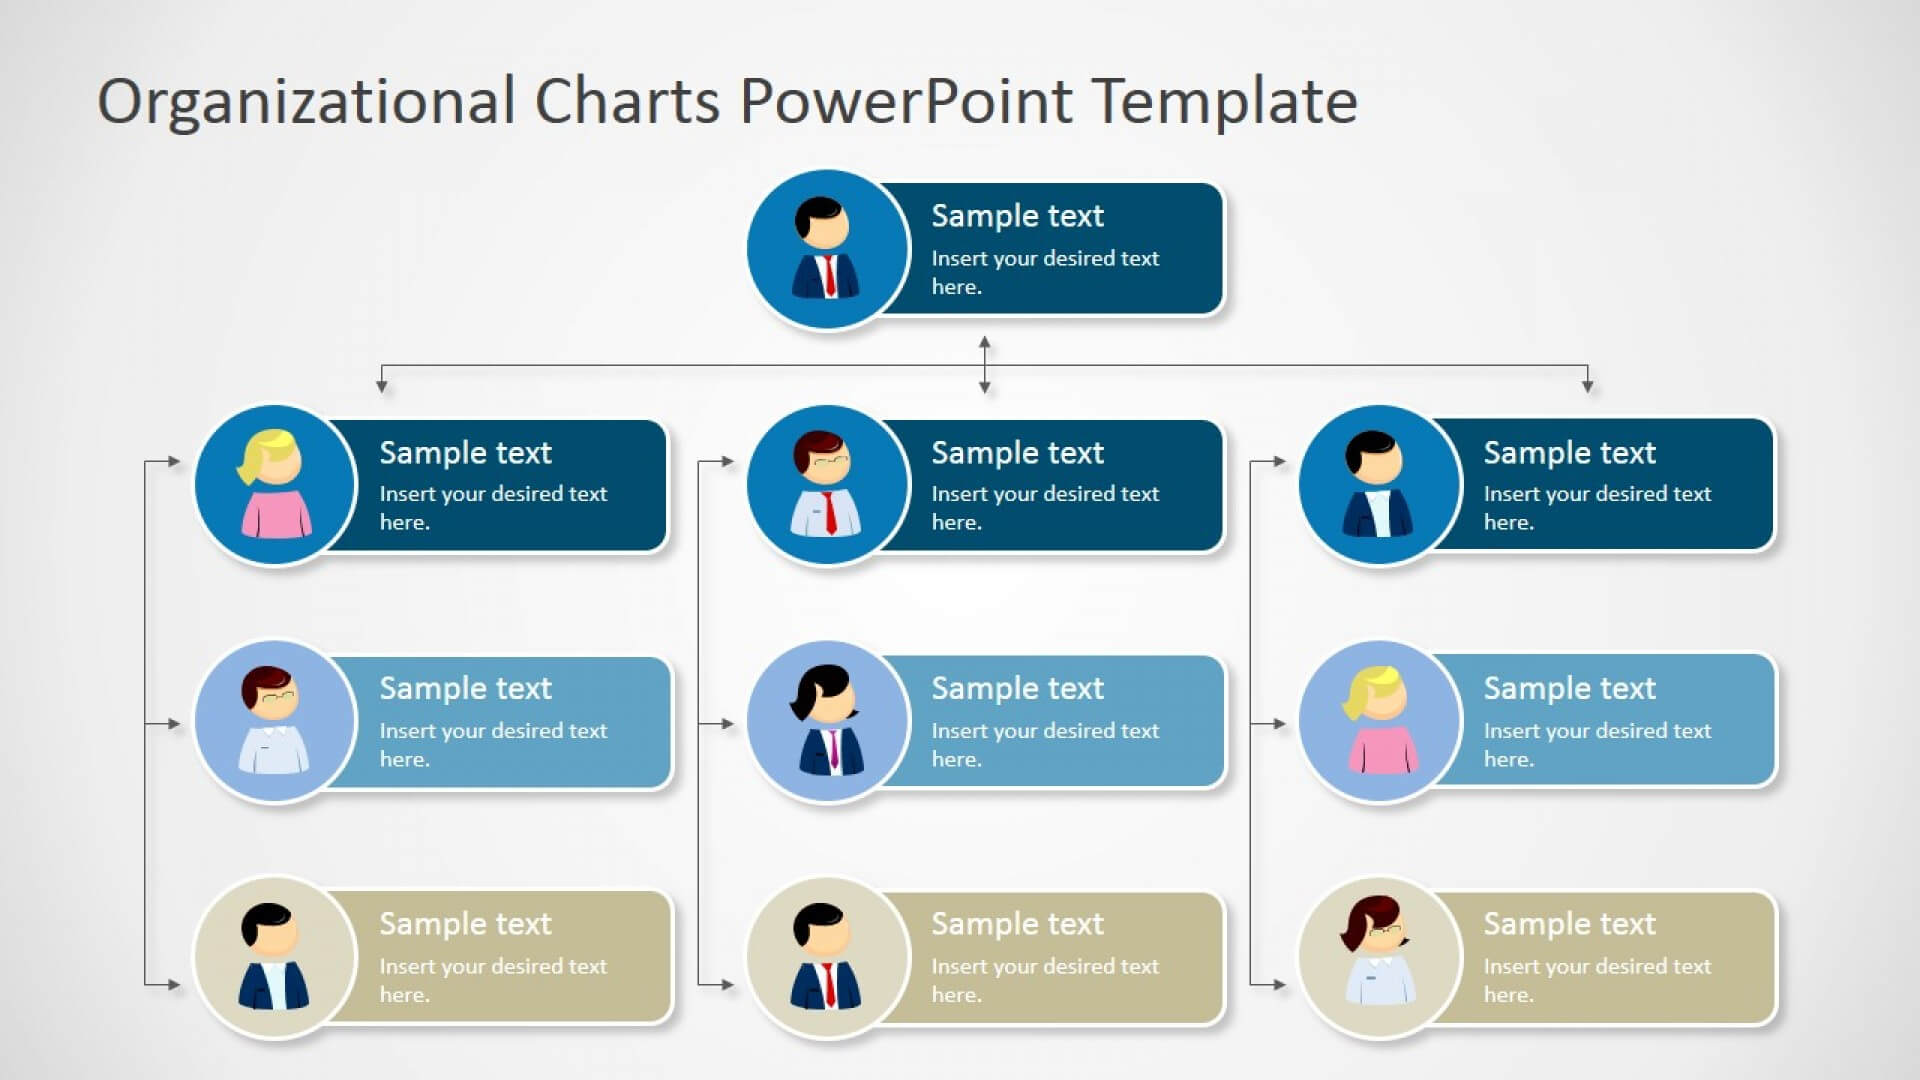 006 Microsoft Org Chart Template Powerpoint Organizational With Regard To Microsoft Powerpoint Org Chart Template